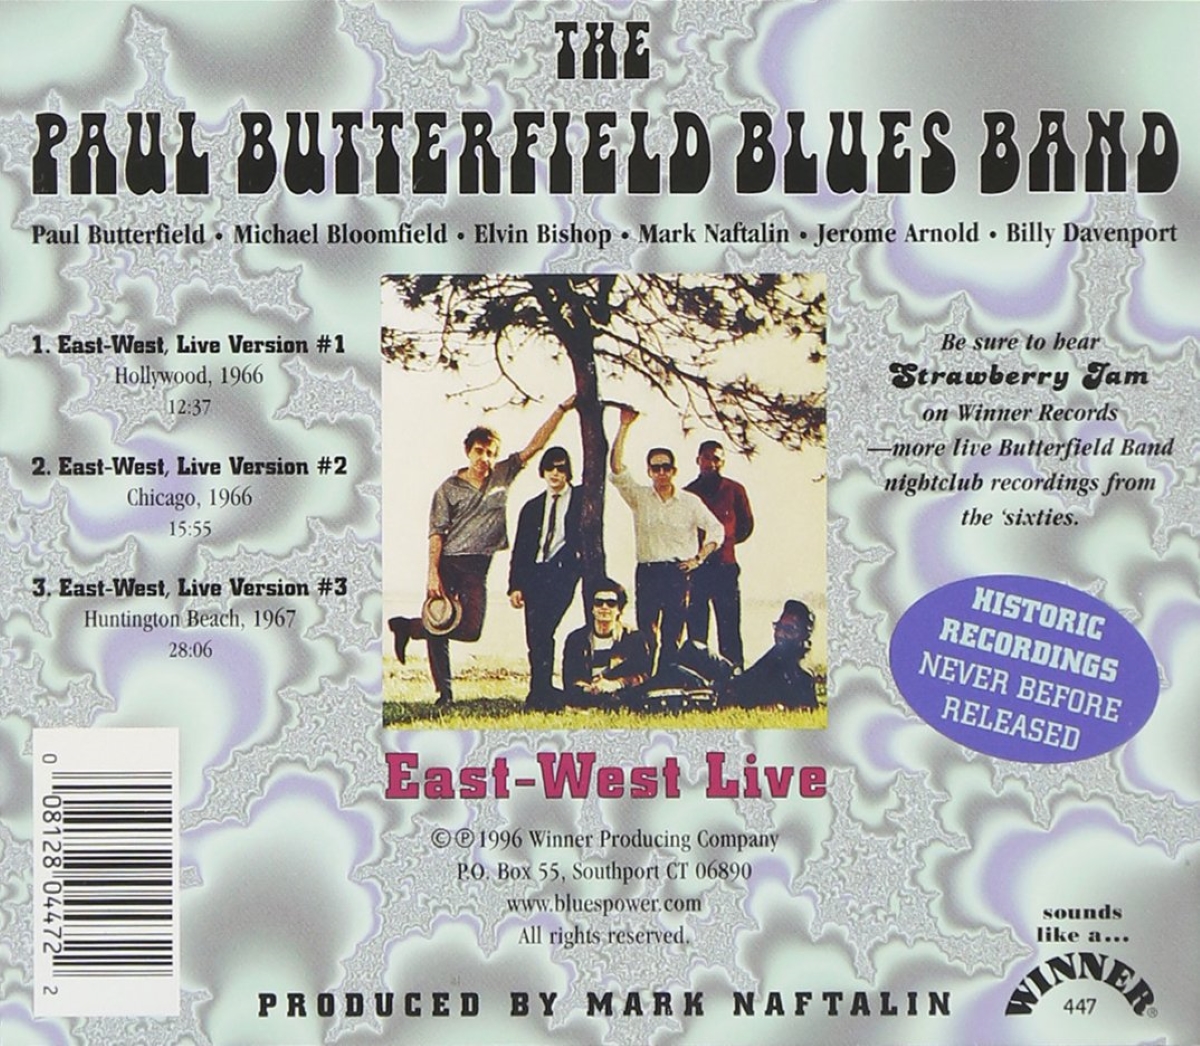 East-West Live